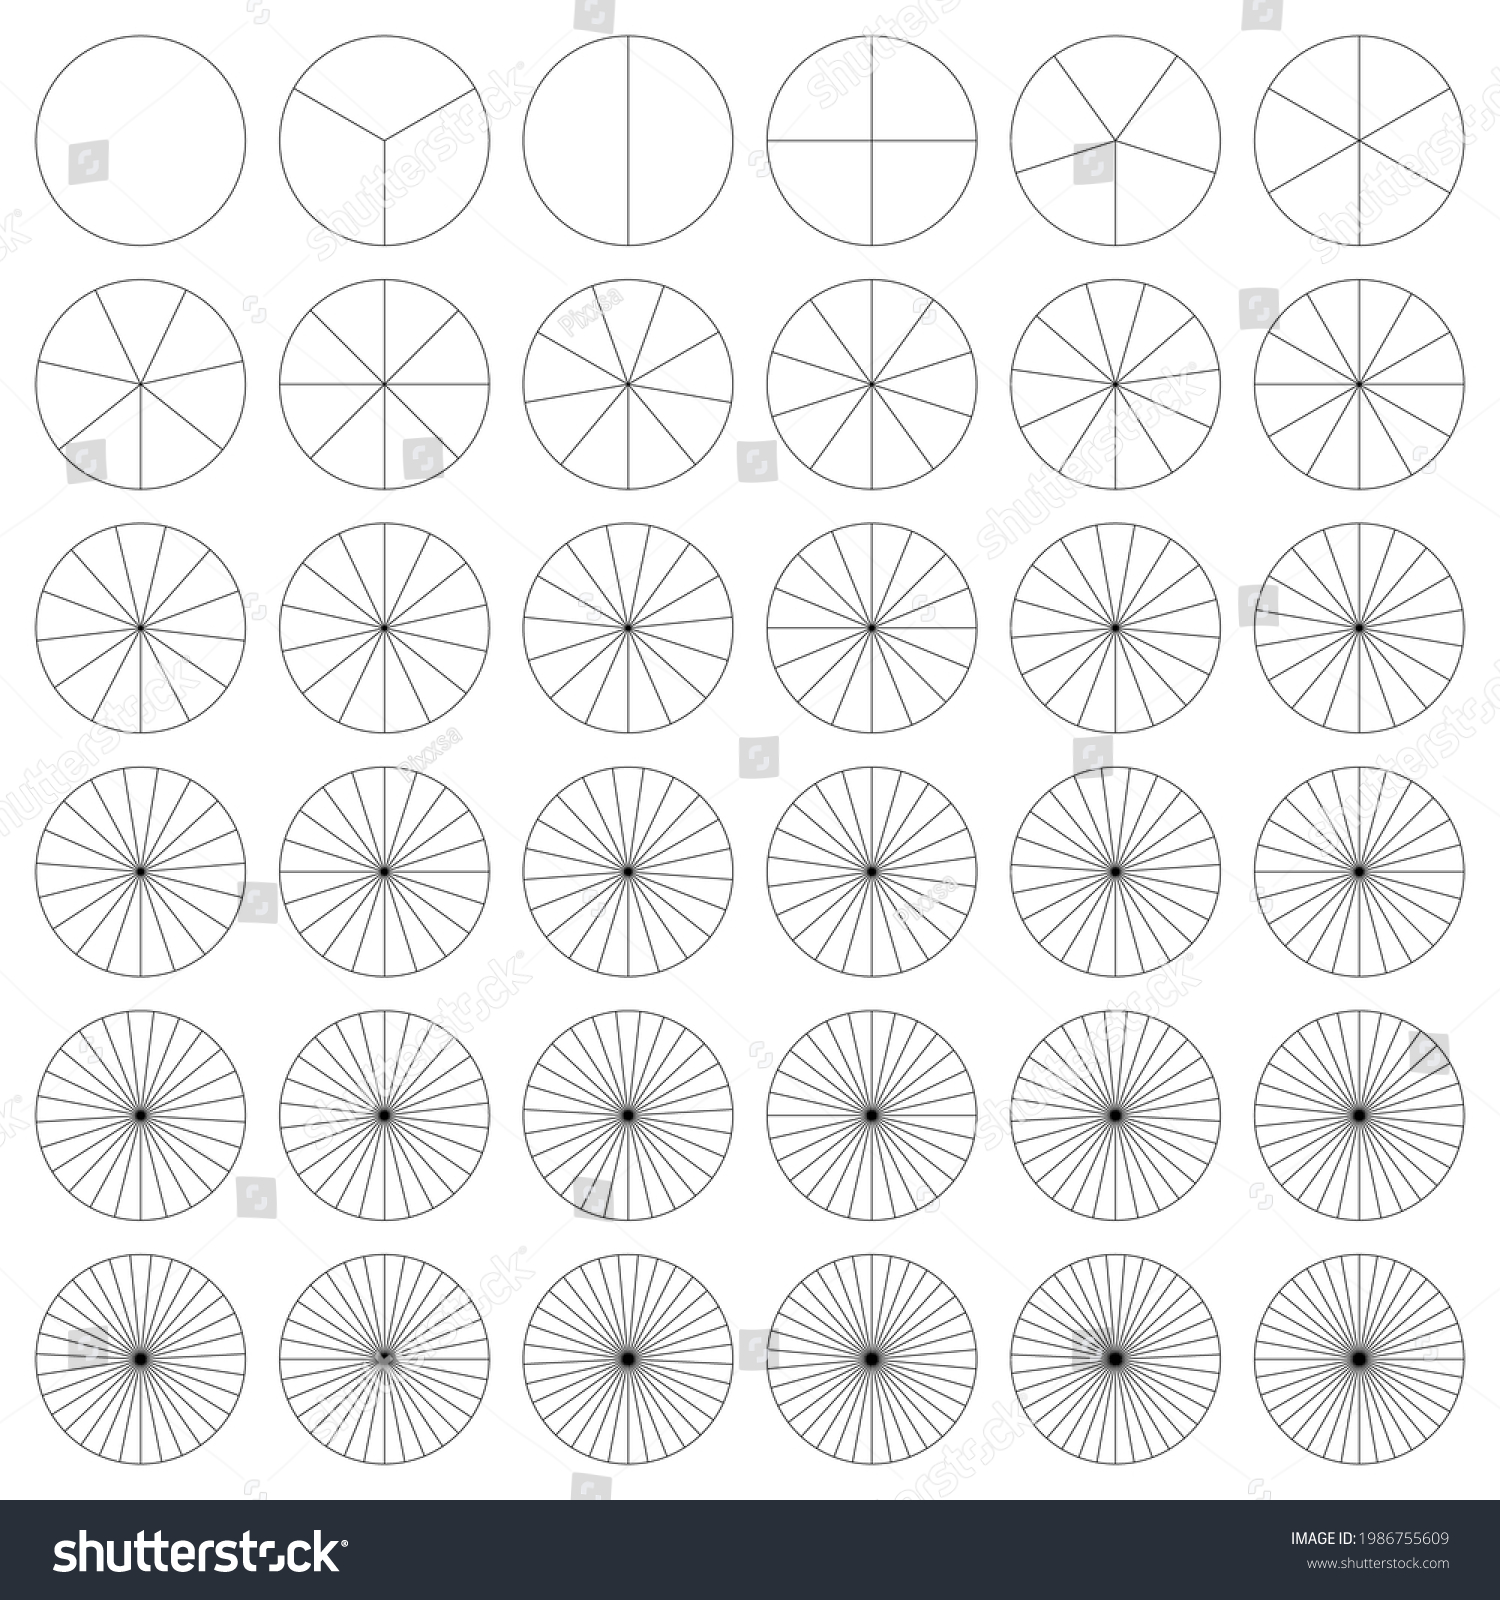 SVG of Segmented circle pie graph, pie chart infographics, presentation template design element from 1 to 36 segments svg